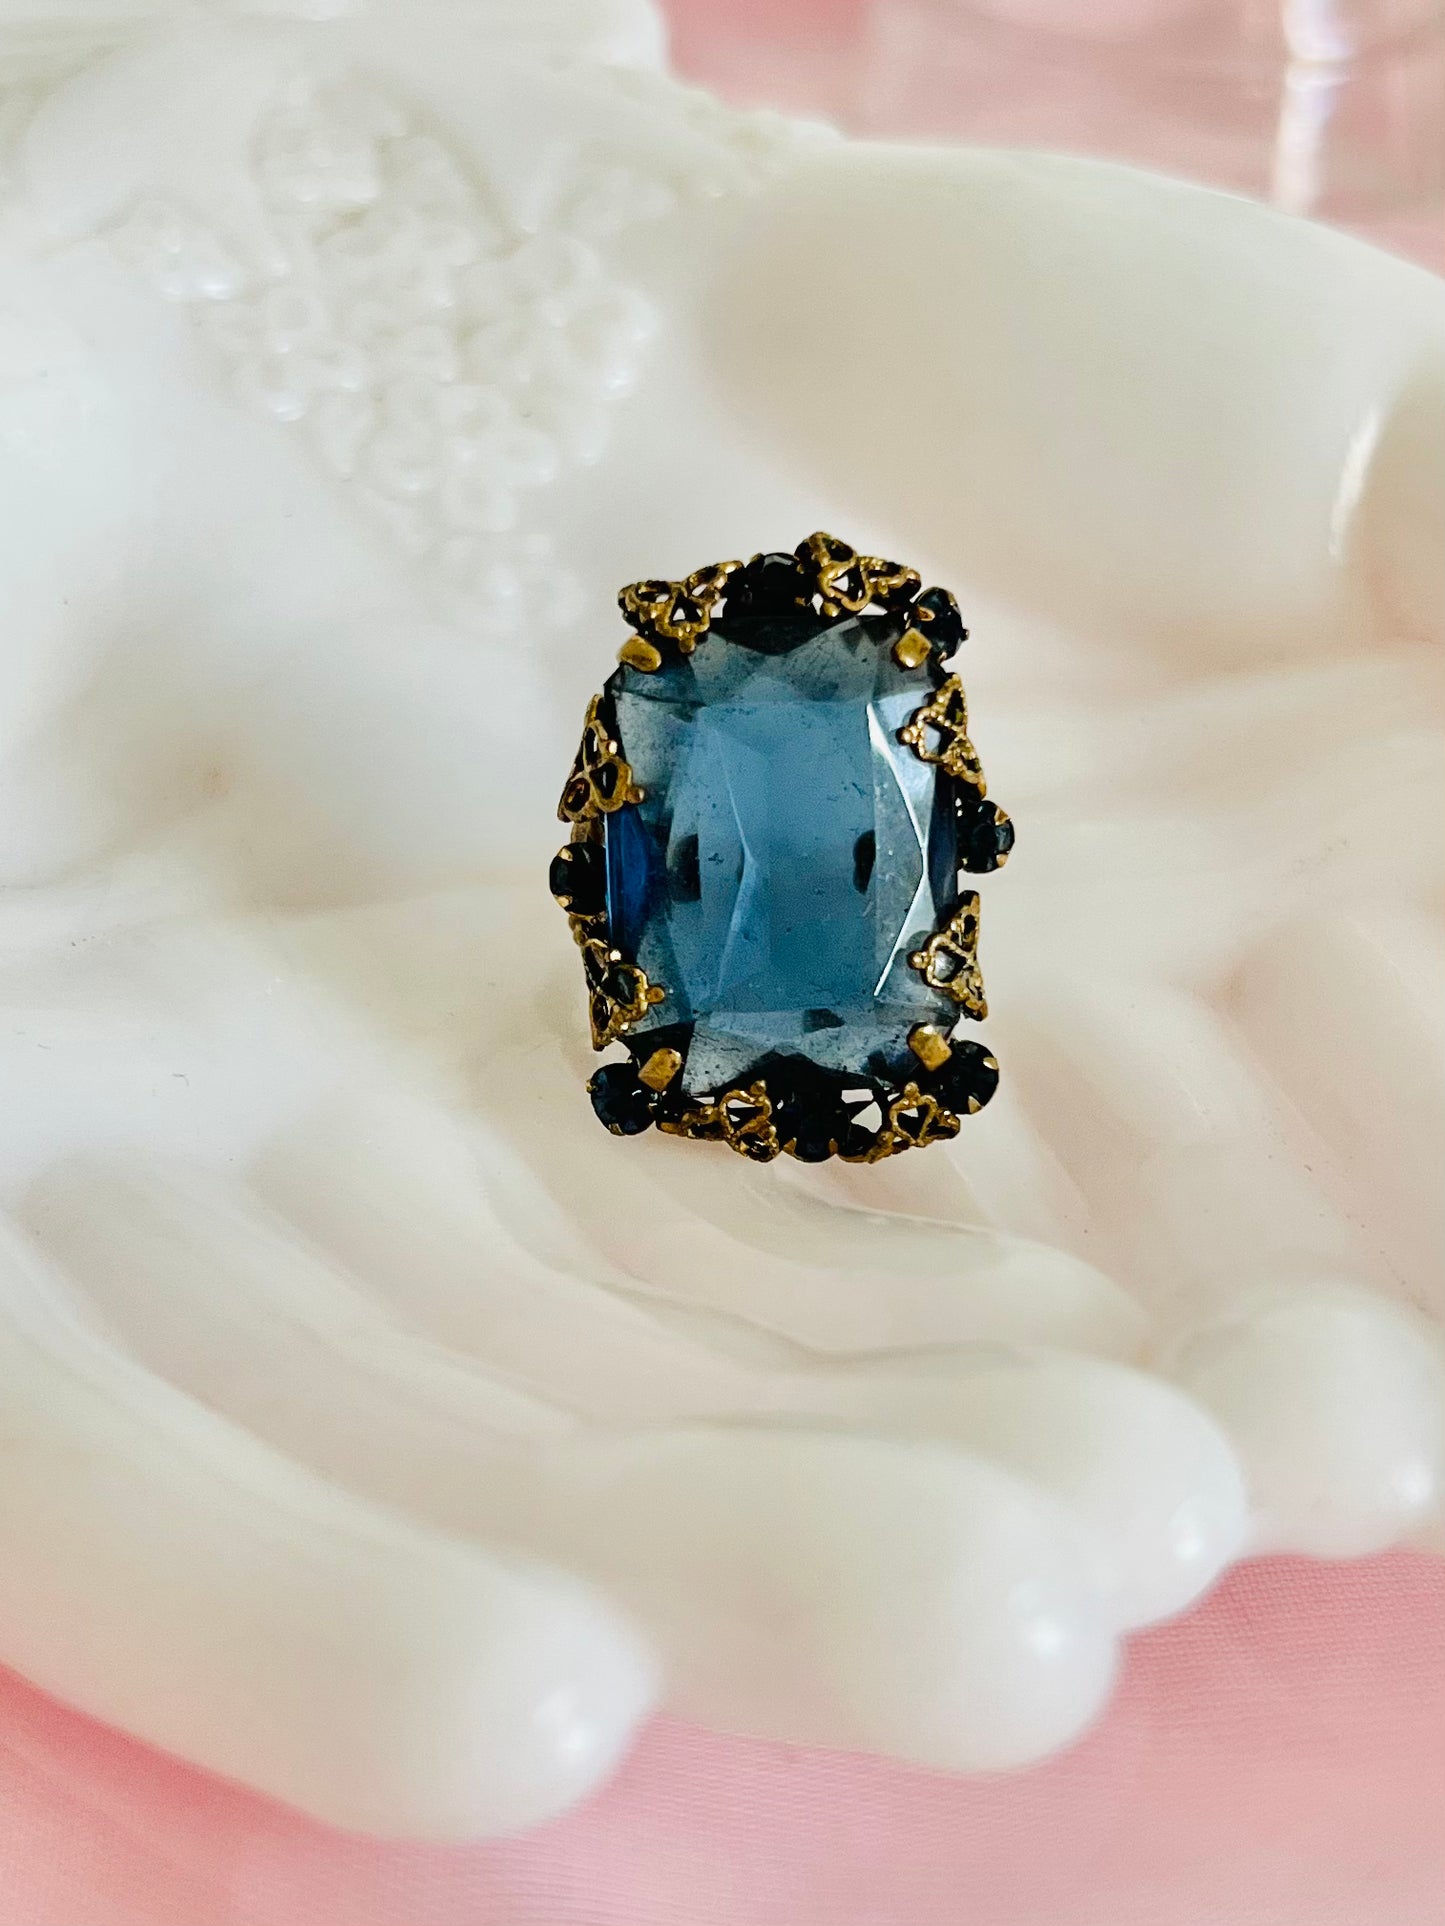 Vintage Western Germany Blue Faceted Glass Rhinestone Ring